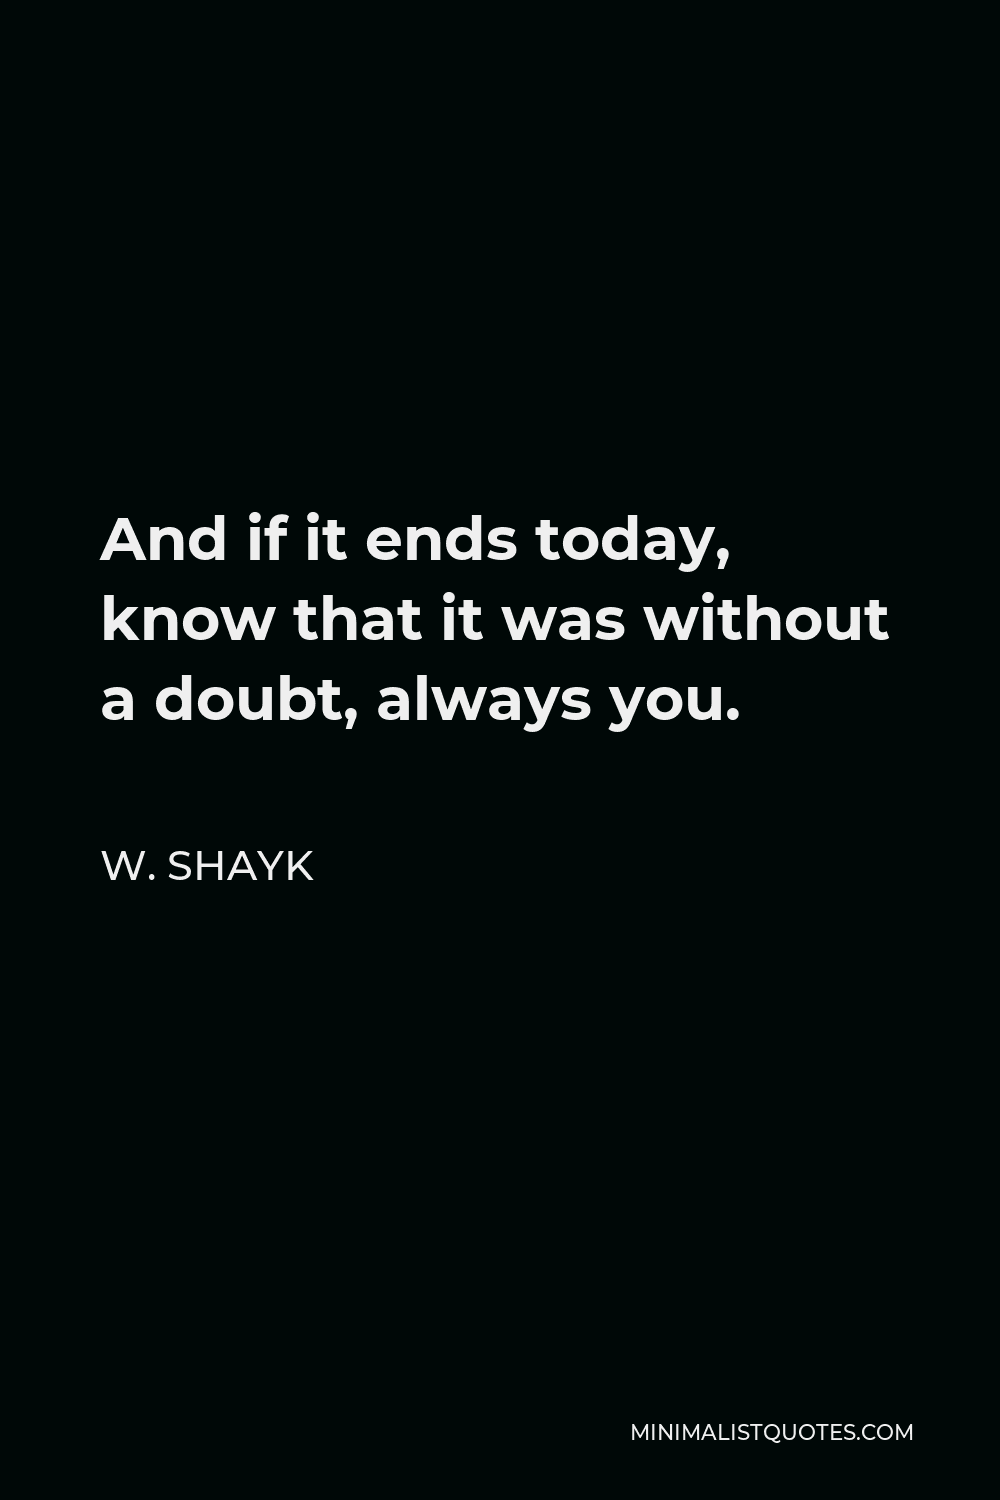 W. Shayk Quote - And if it ends today, know that it was without a doubt, always you.